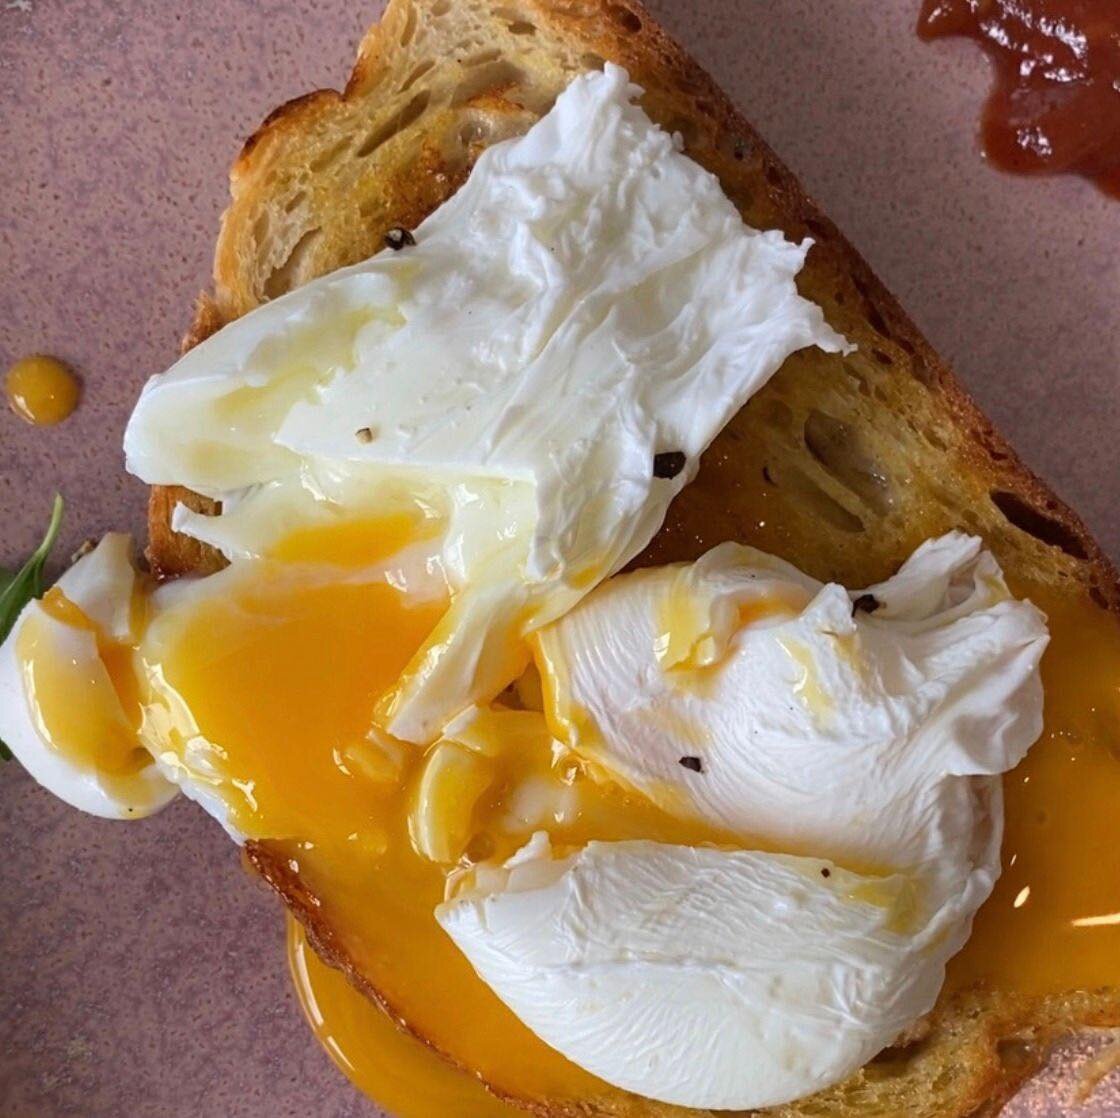 K.I.S.S. 

We're talking about simple things. Done really well. 

Organic farm laid eggs, poached to perfection. On our range of toast options with your choice of sides. 

IYKYK. It just works!